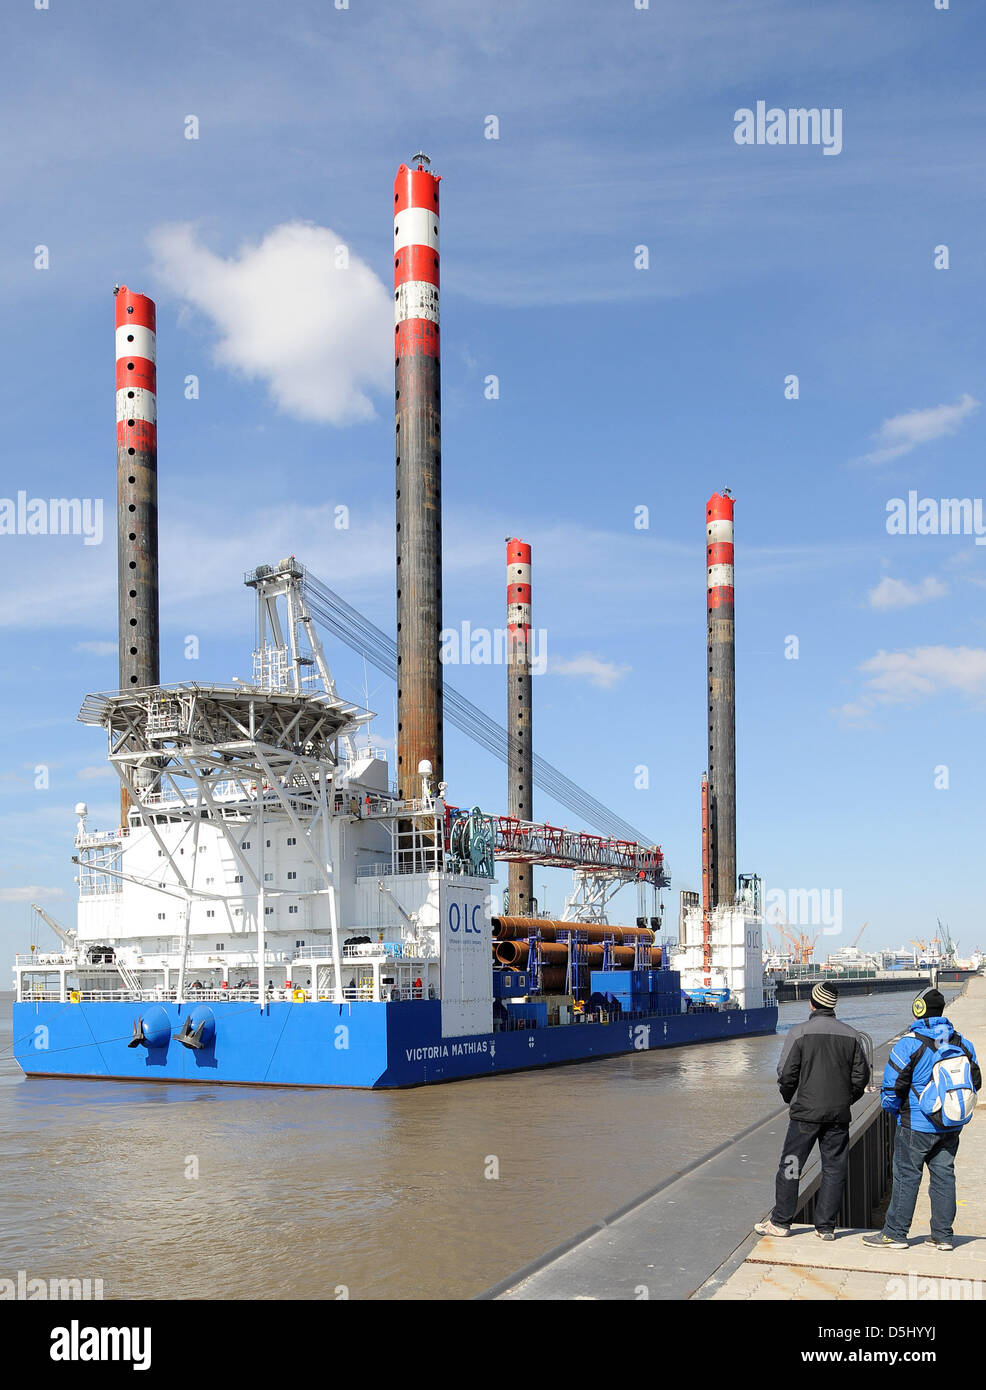 Offshore platform installer 'Victoria Mathias' of Offshore Logistic Company (OLC) arrives at Kaiserschleuse lock in Bremerhaven, Germany, 03 April 2013. Work platforms like this are used in the construction of offshore wind turbines. Photo: INGO WAGNER Stock Photo